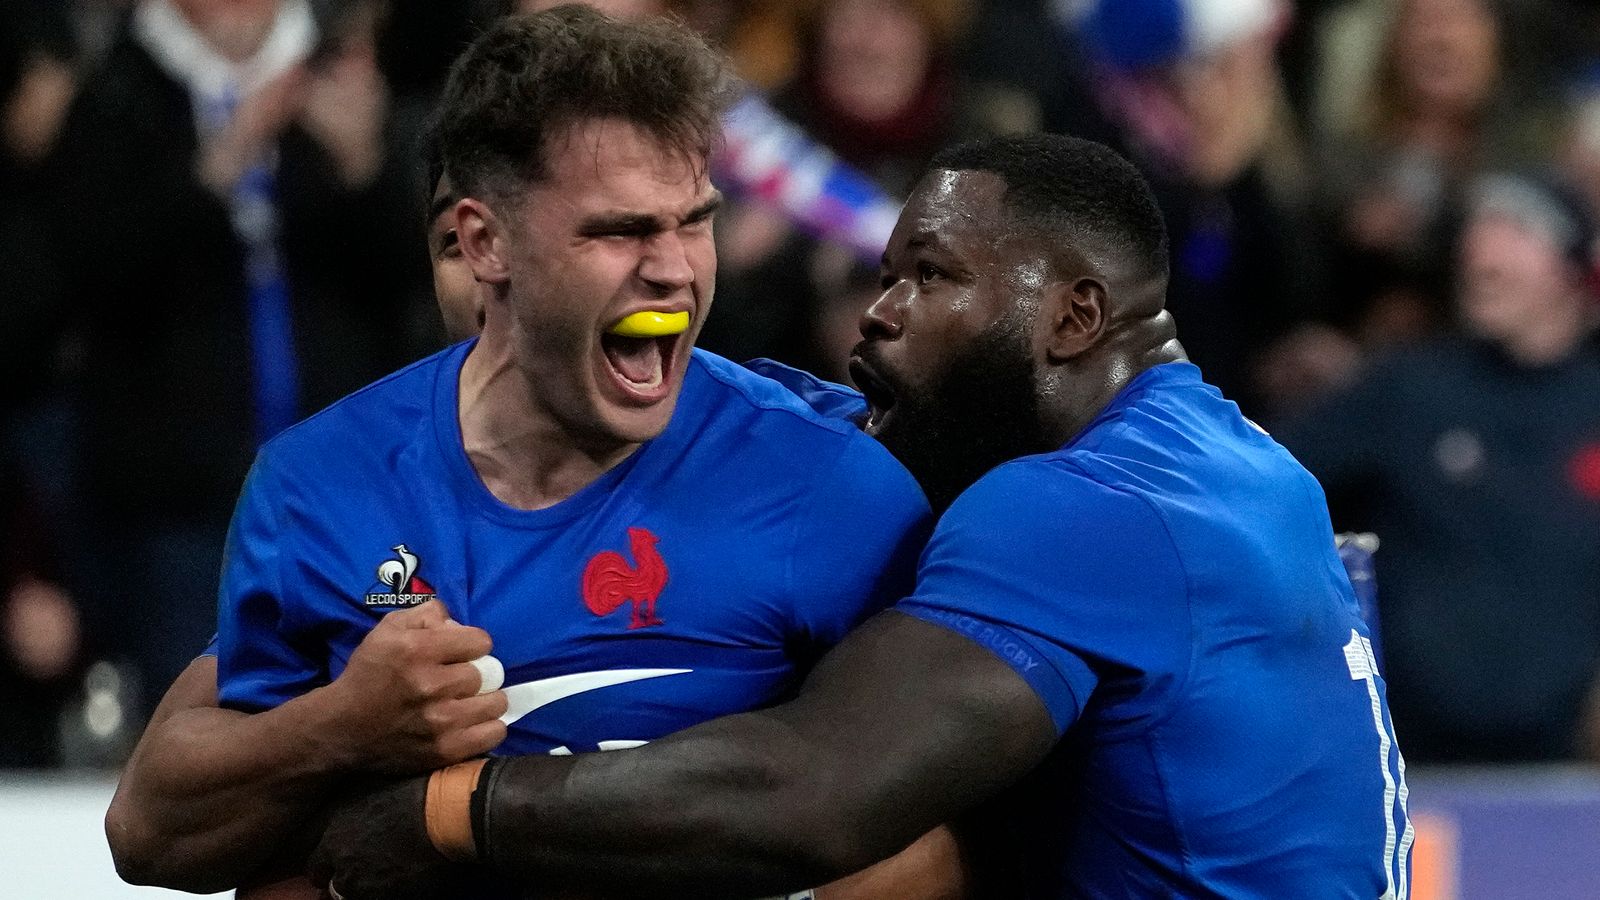 France 30-29 Australia: Late Damian Penaud try seals thrilling win for hosts at Stade de France